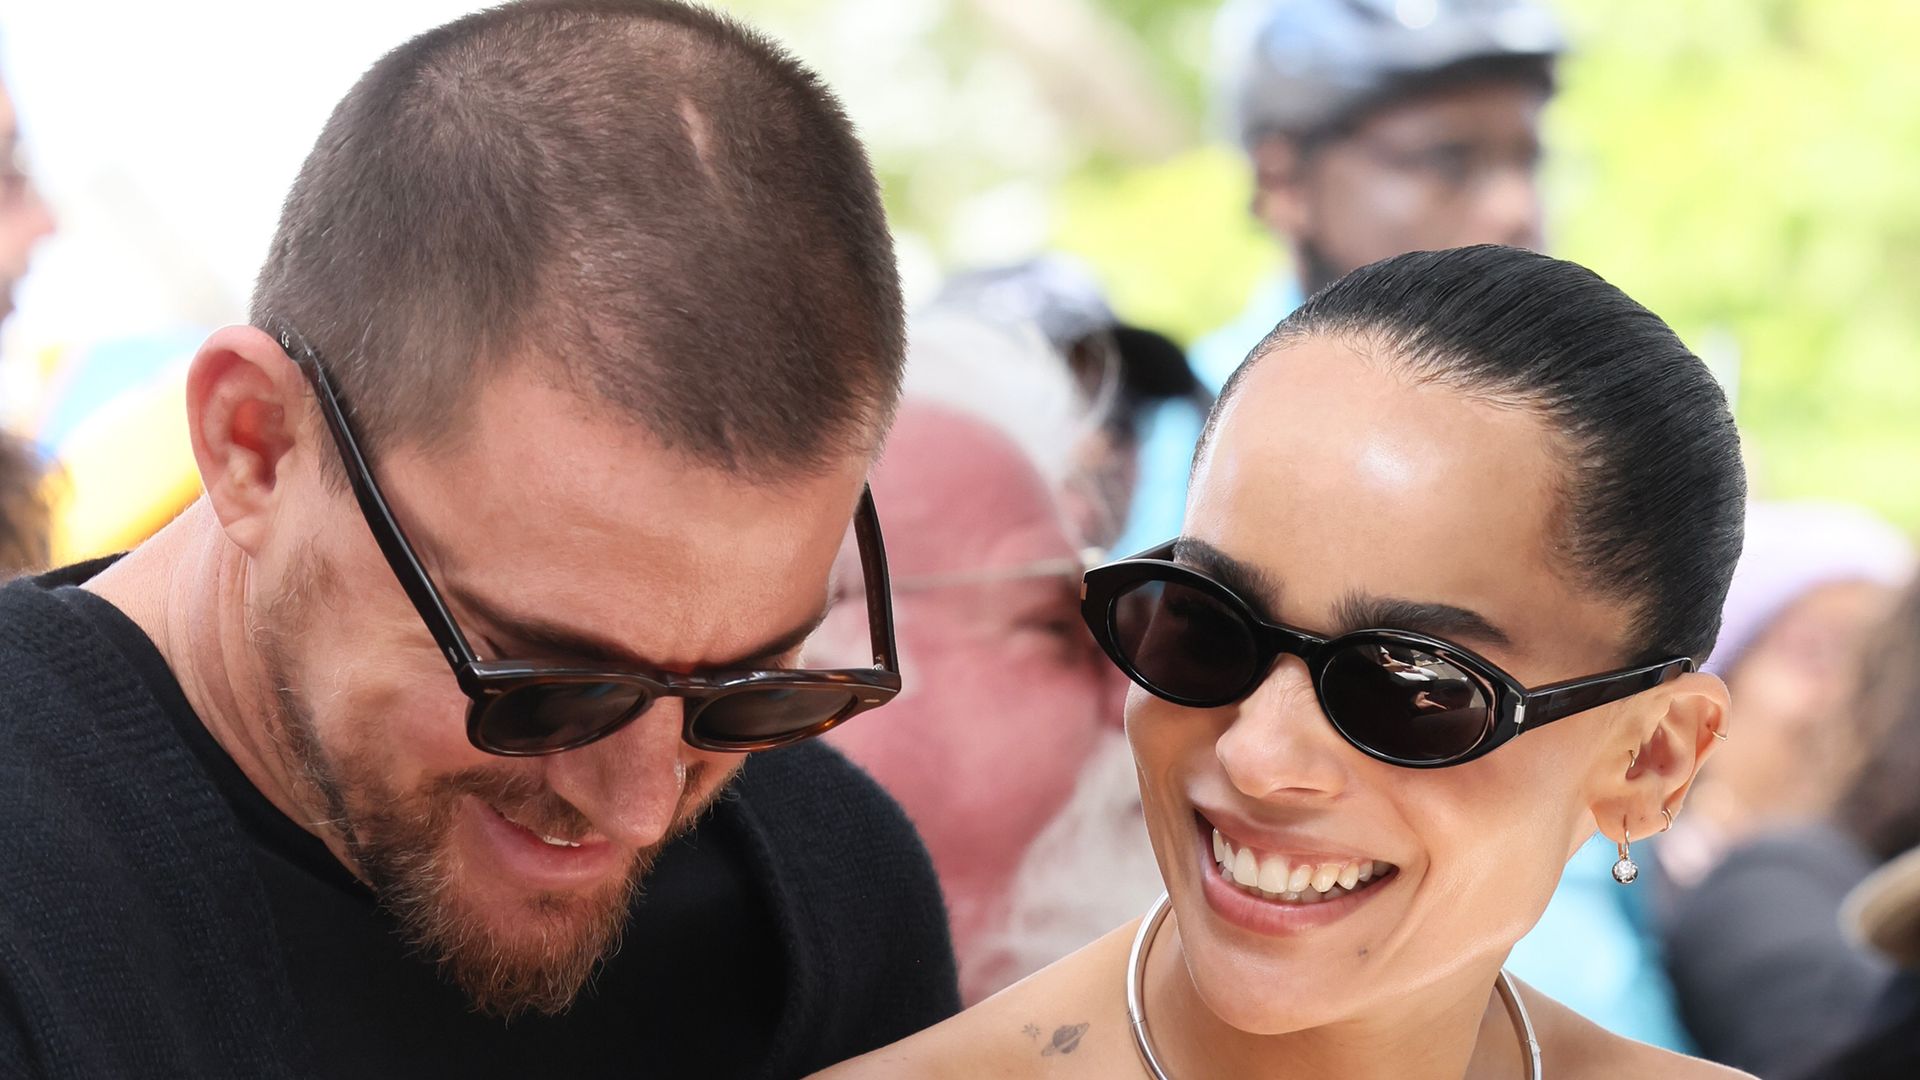 Zoë Kravitz's engagement ring: Here's everything you need to know